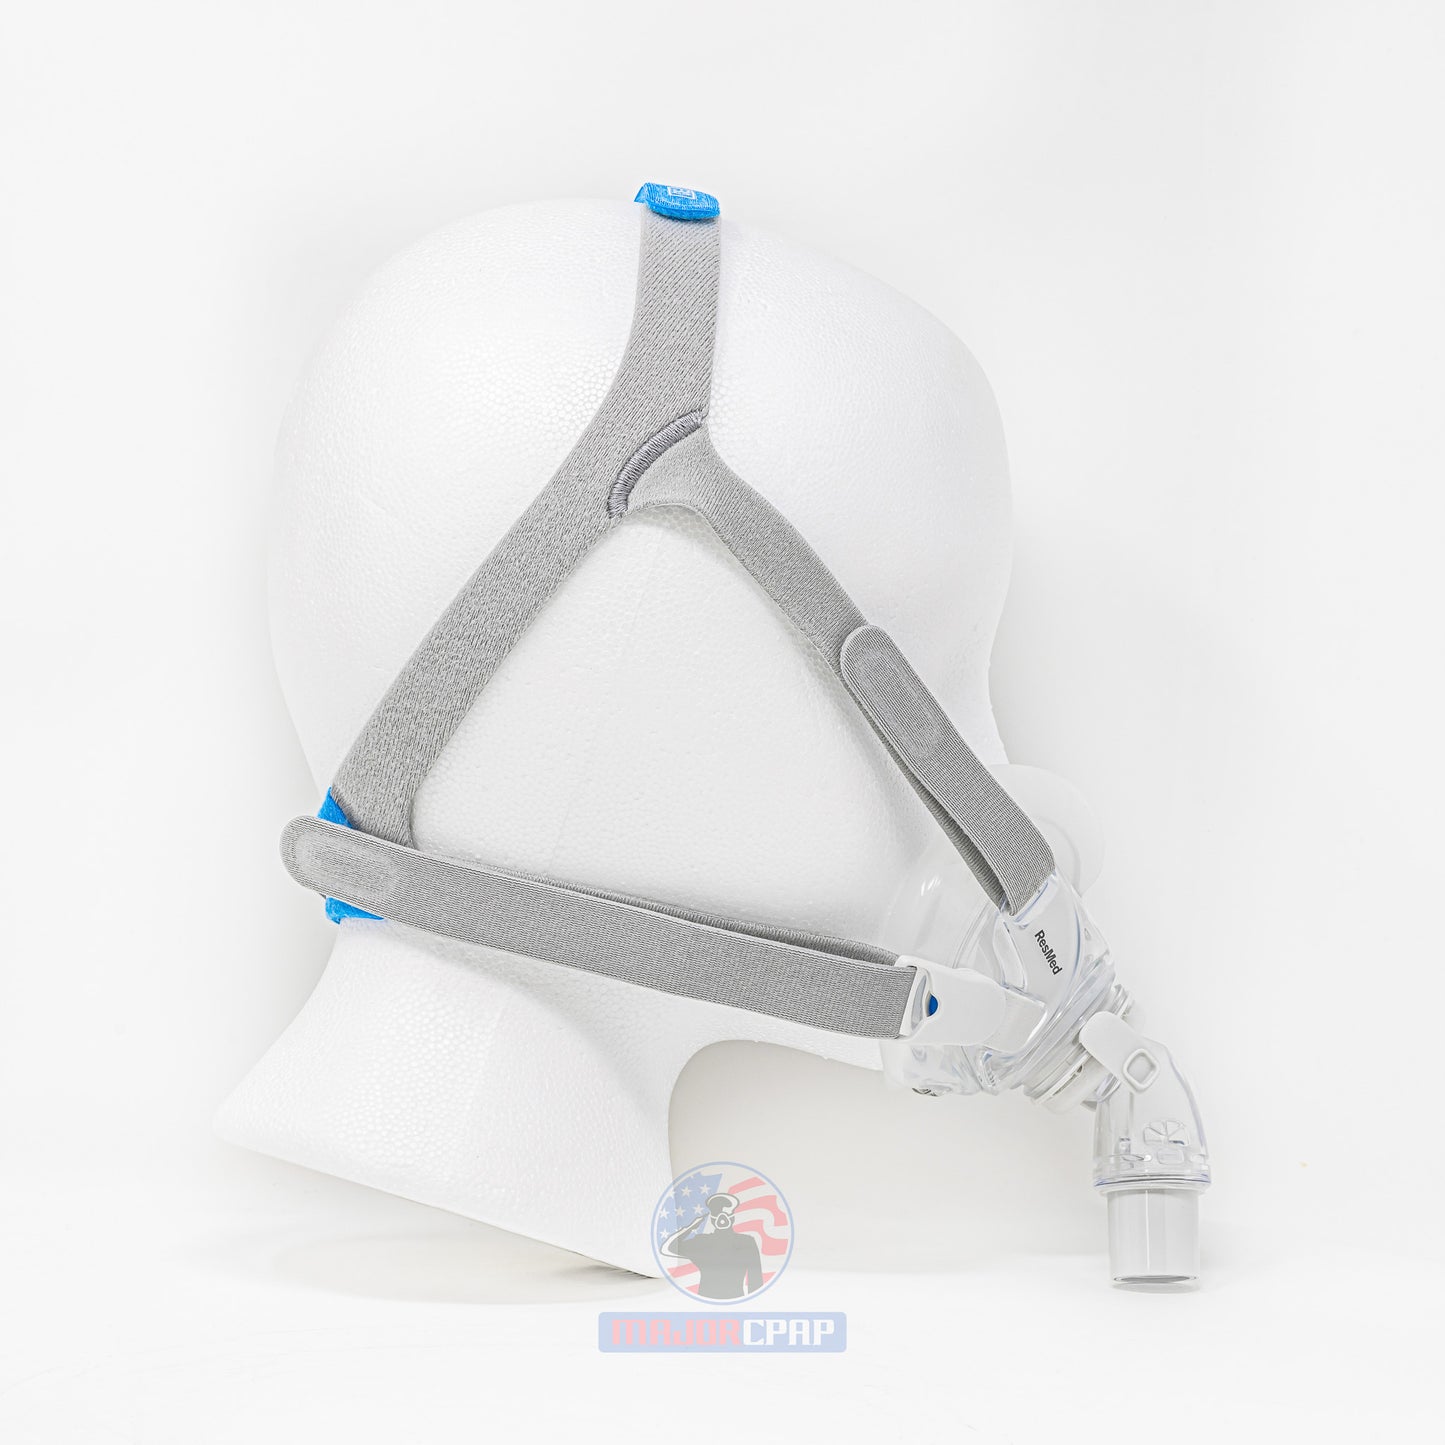 ResMed AirFit F30 Full Face CPAP Mask with Headgear